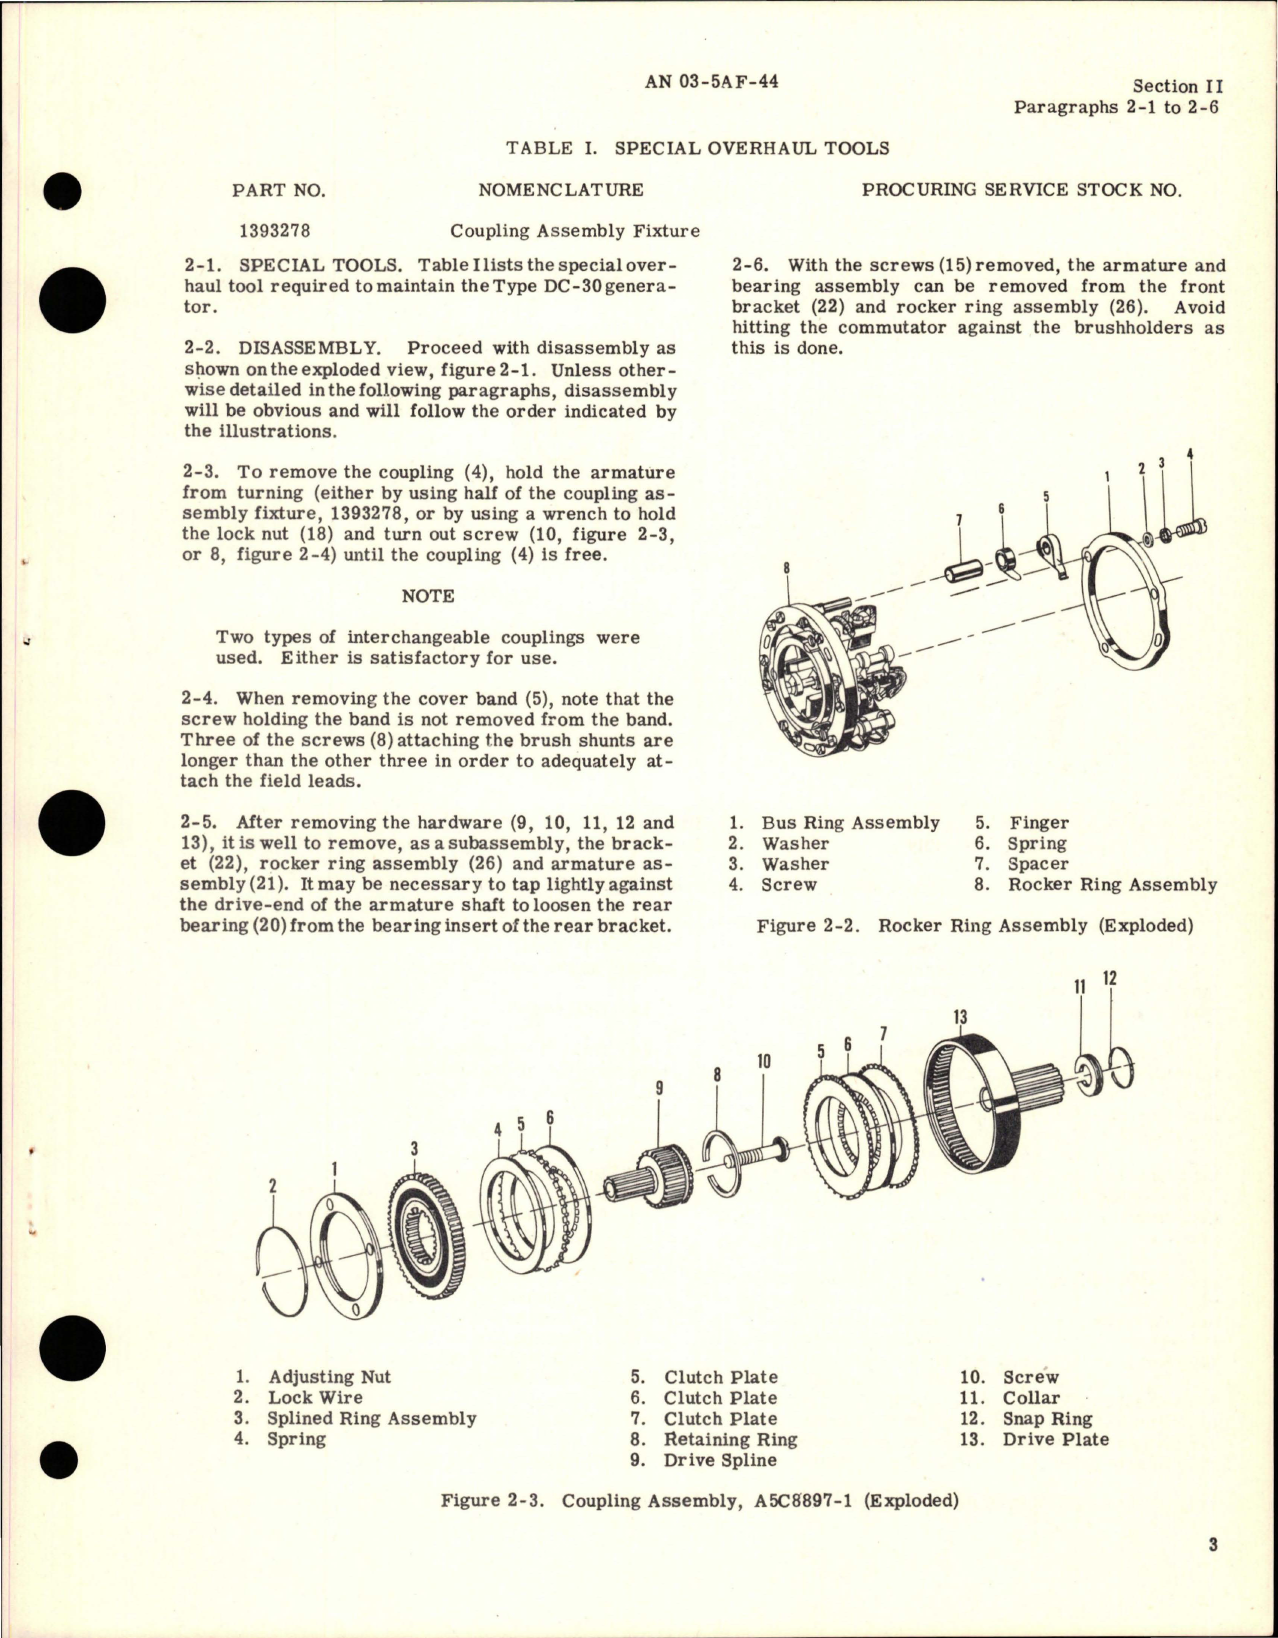 Sample page 5 from AirCorps Library document: Overhaul Instructions for DC-30 Generator - Part A19A6161 